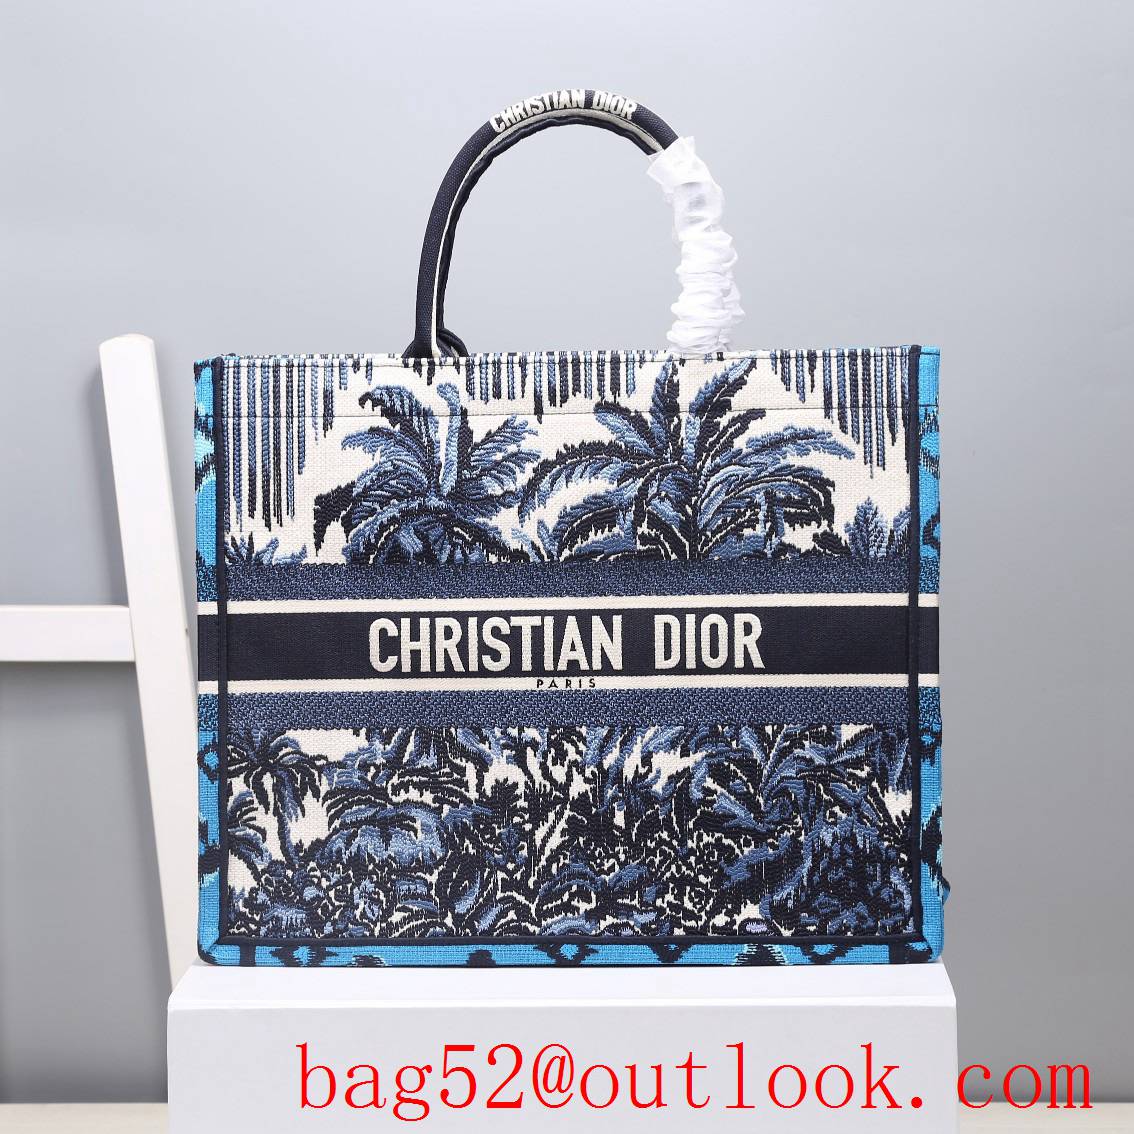 Dior Mushroom Print All Over Blue Dior Palms Embroidered book tote large bag